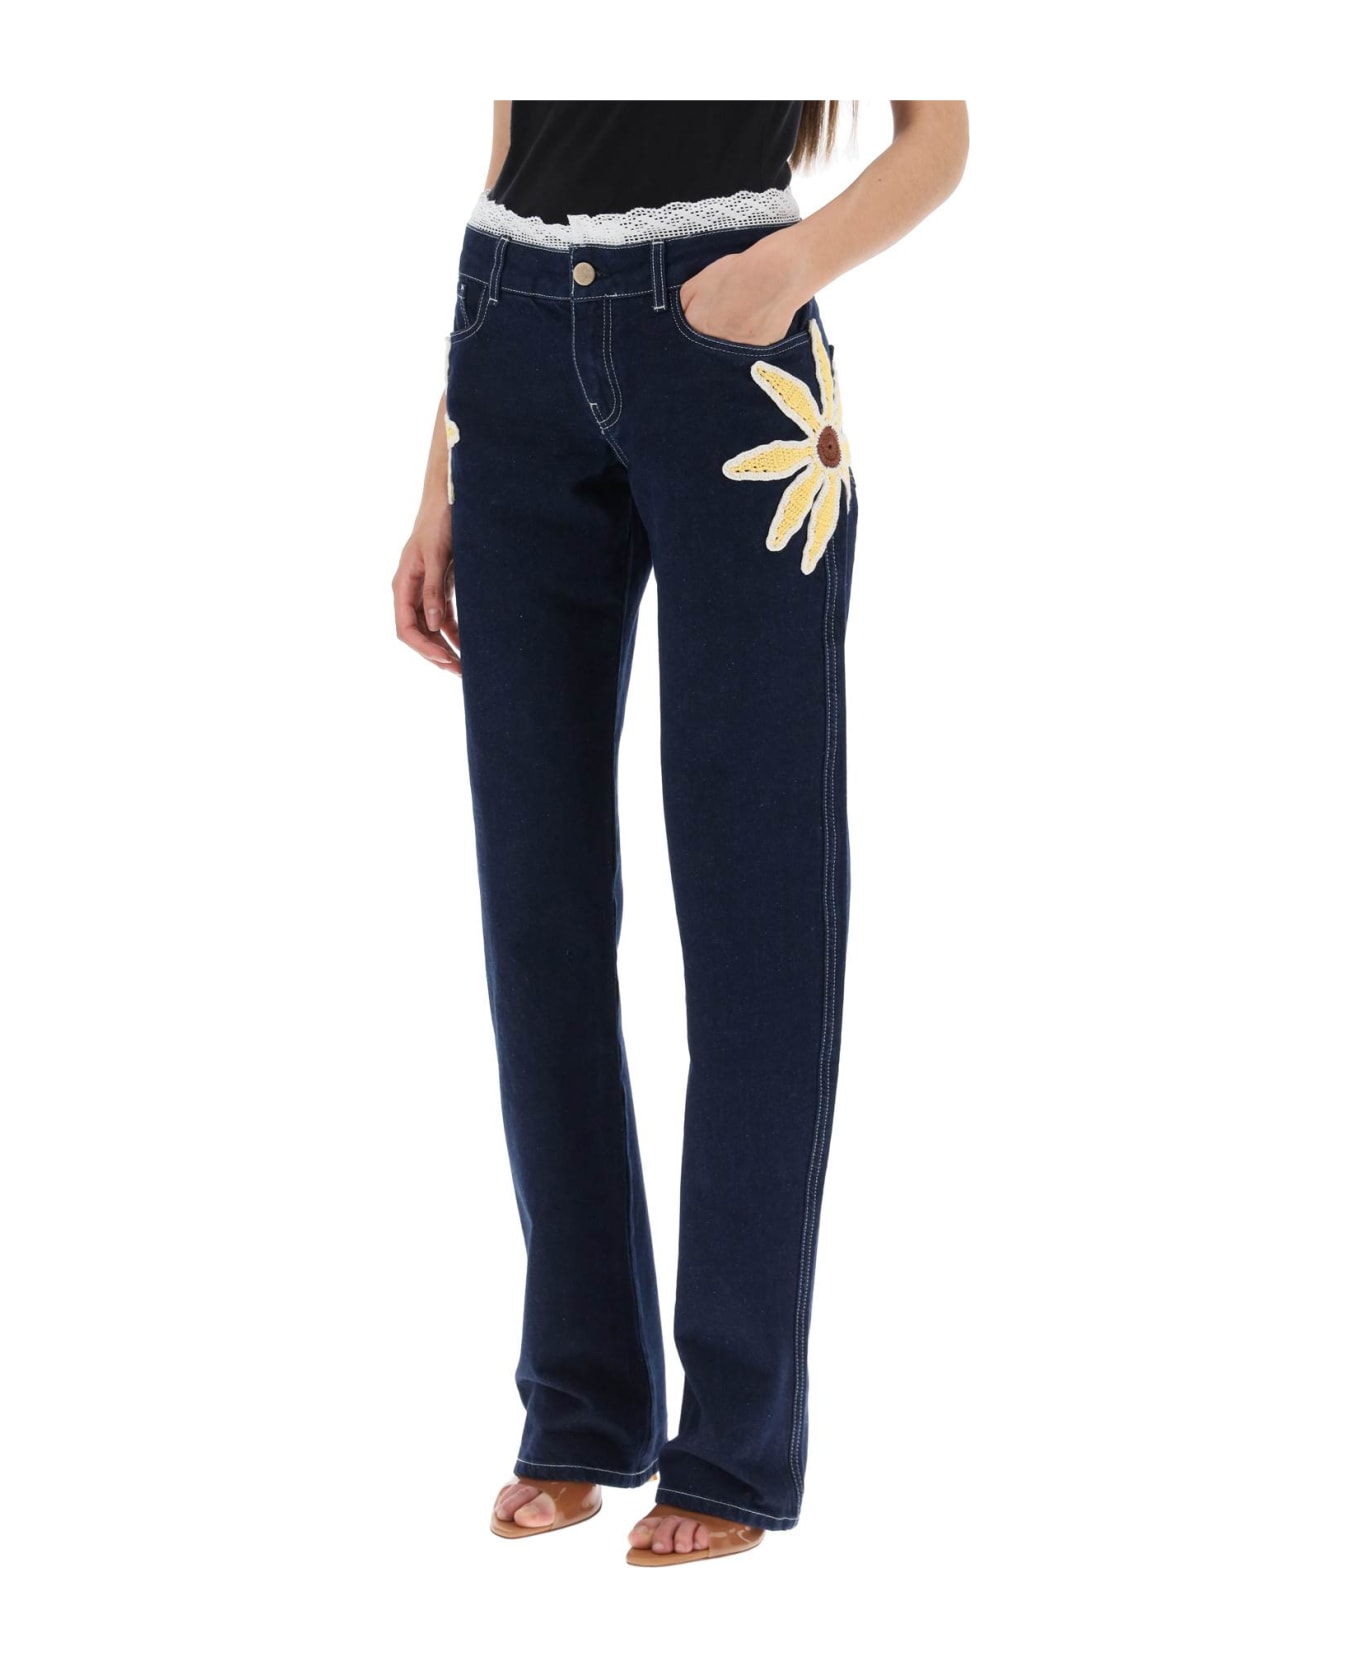 SIEDRES Low-rise Jeans With Crochet Flowers - BLUE (Blue)